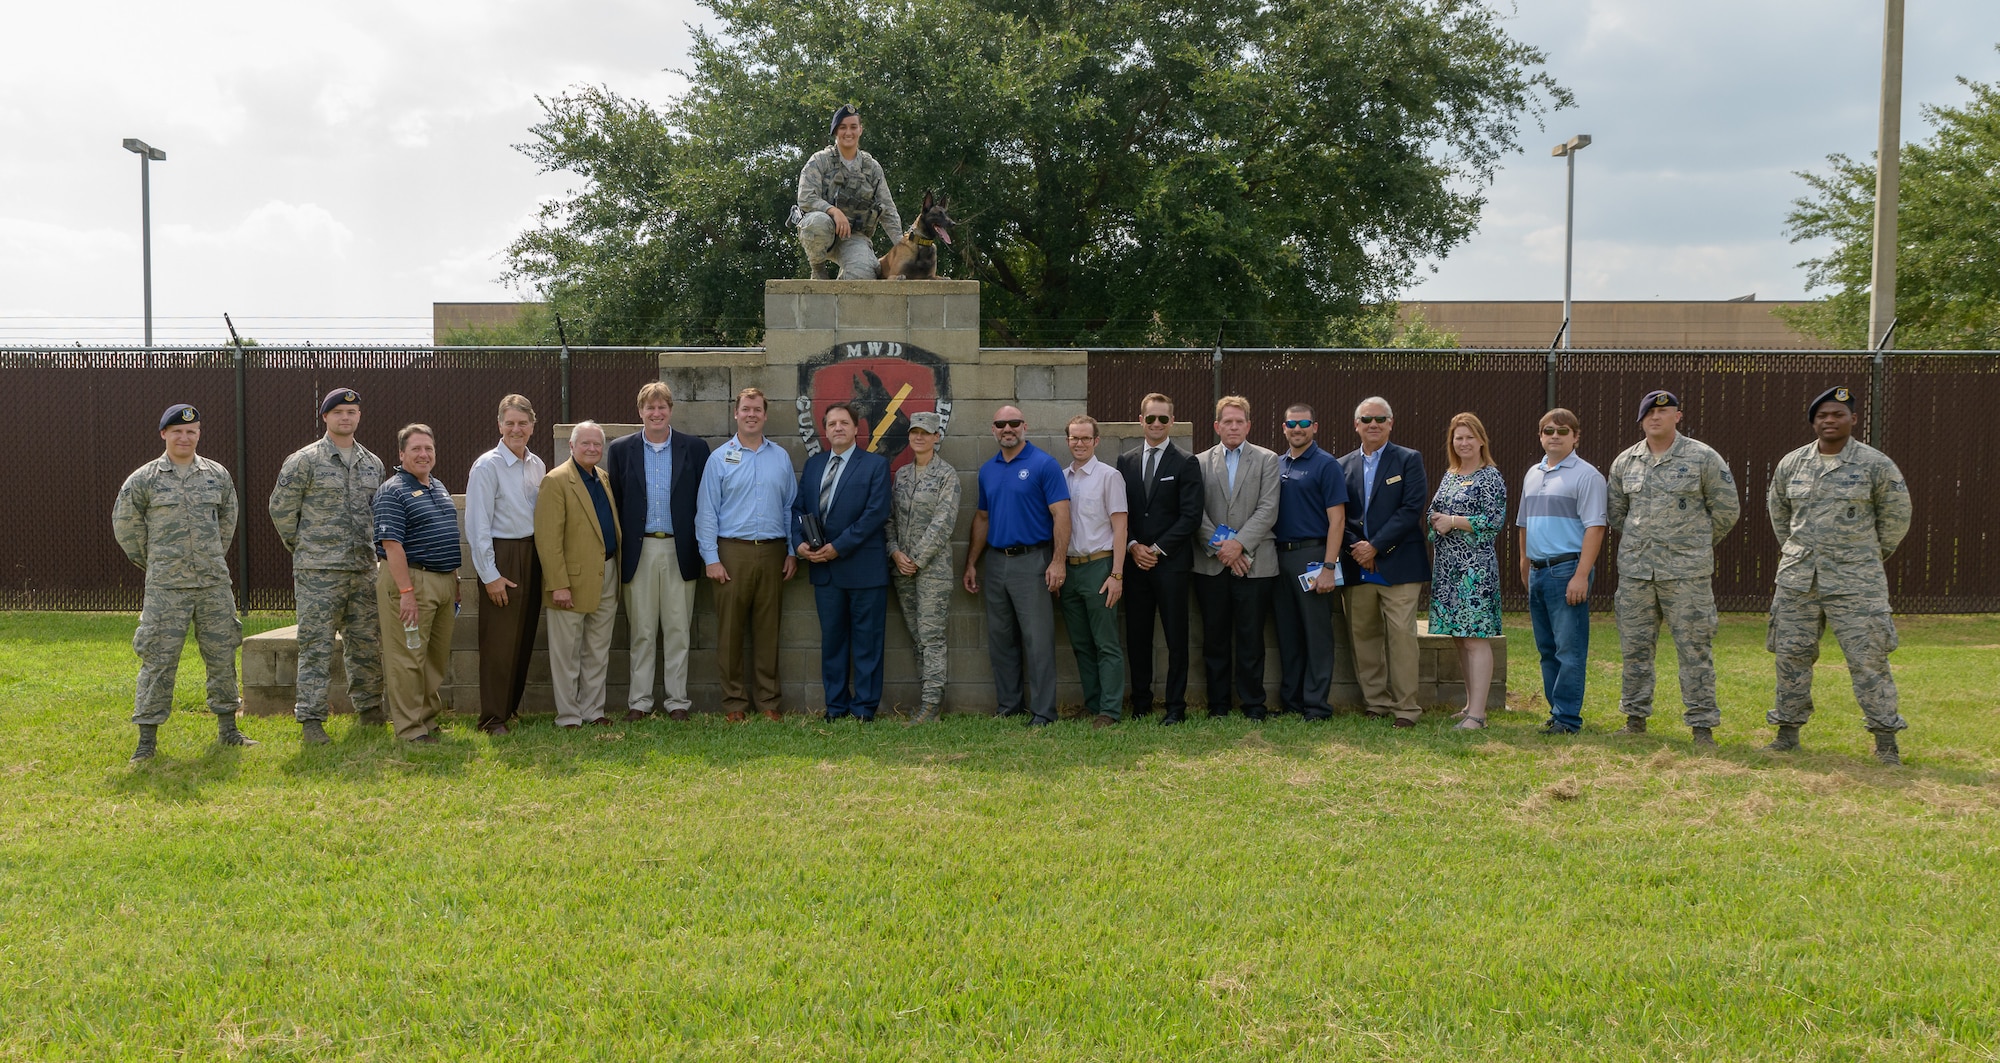 U.S. Air Force Col. Marcia Quigley, 81st Mission Support commander and 81st Security Forces Squadron personnel pose for a group photo with honorary commanders during the 81st Mission Support Group Honorary Commanders tour at the MWD Kennels at Keesler Air Force Base, Mississippi, Aug. 23, 2018. The honorary commander program is a partnership between base leadership and local civic leaders to promote strong ties between military and civilian leaders. (U.S. Air Force Photo by Andre' Askew)